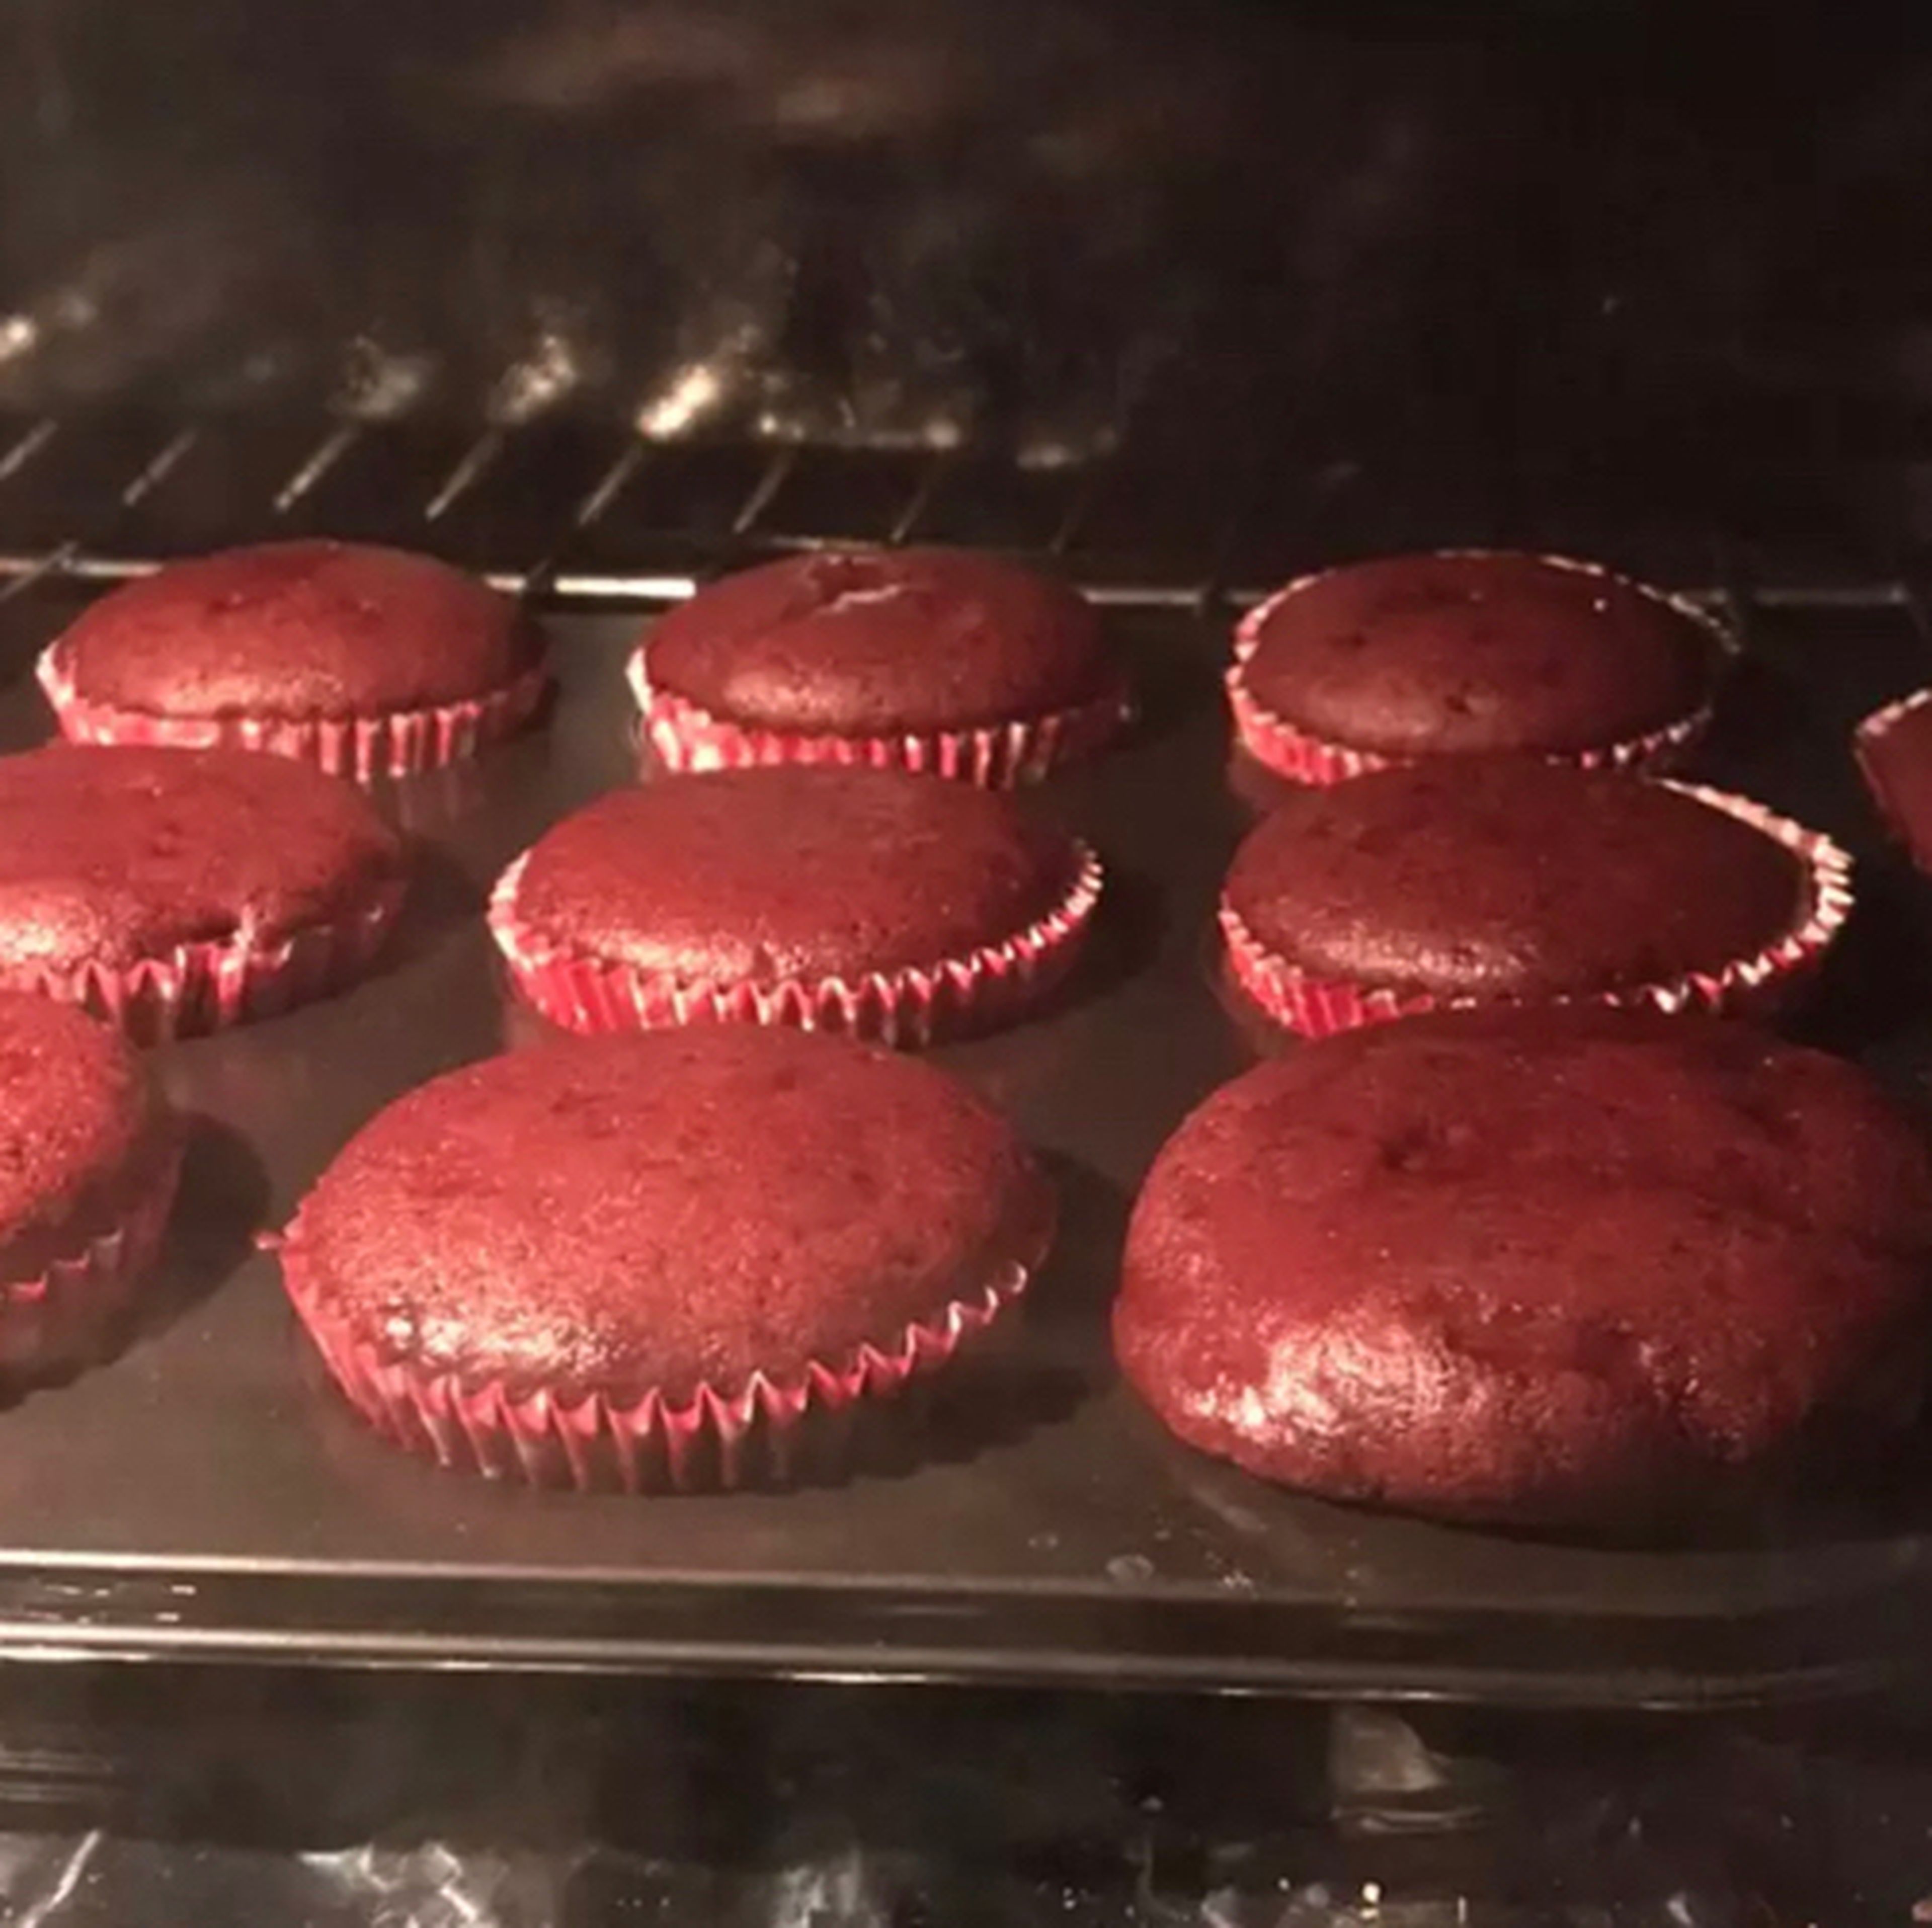 Bake them for 20 to 25 minutes and then check with a toothpick that the marrow is cooked. Then let it cool and in the meantime, prepare the icing .